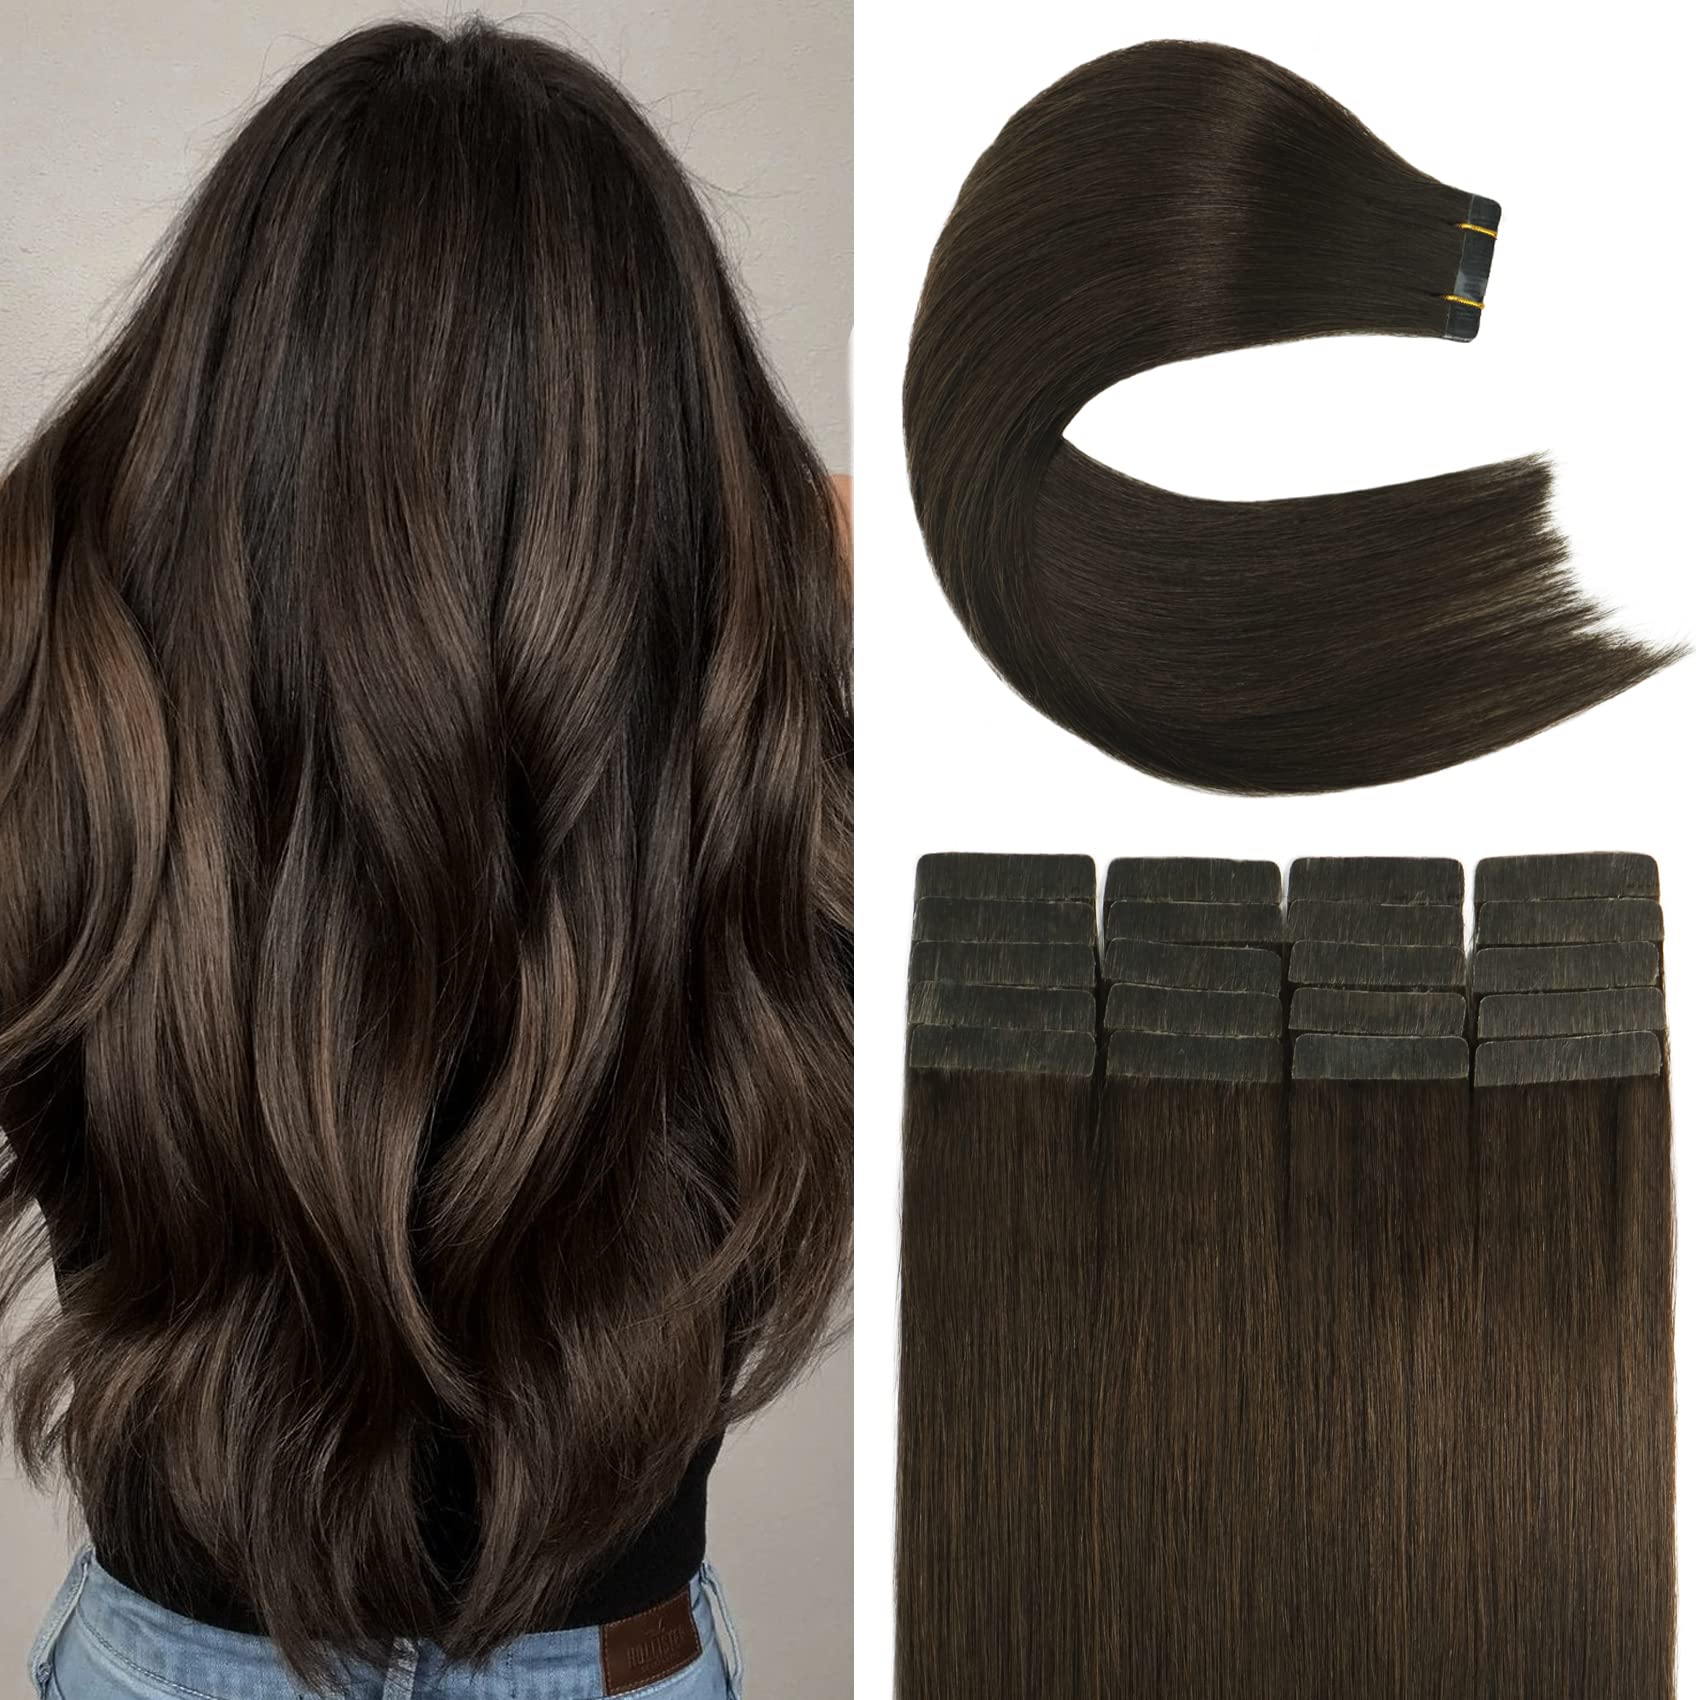 Mua 16 InTape in Hair Extensions Human Hair, Dark Brown Natural Thick Hair  Extensions, Made of Traceable Remy Human Silcky Hair and 8A Grade Quality  (Color Dark Brown, 16 Inch) trên Amazon